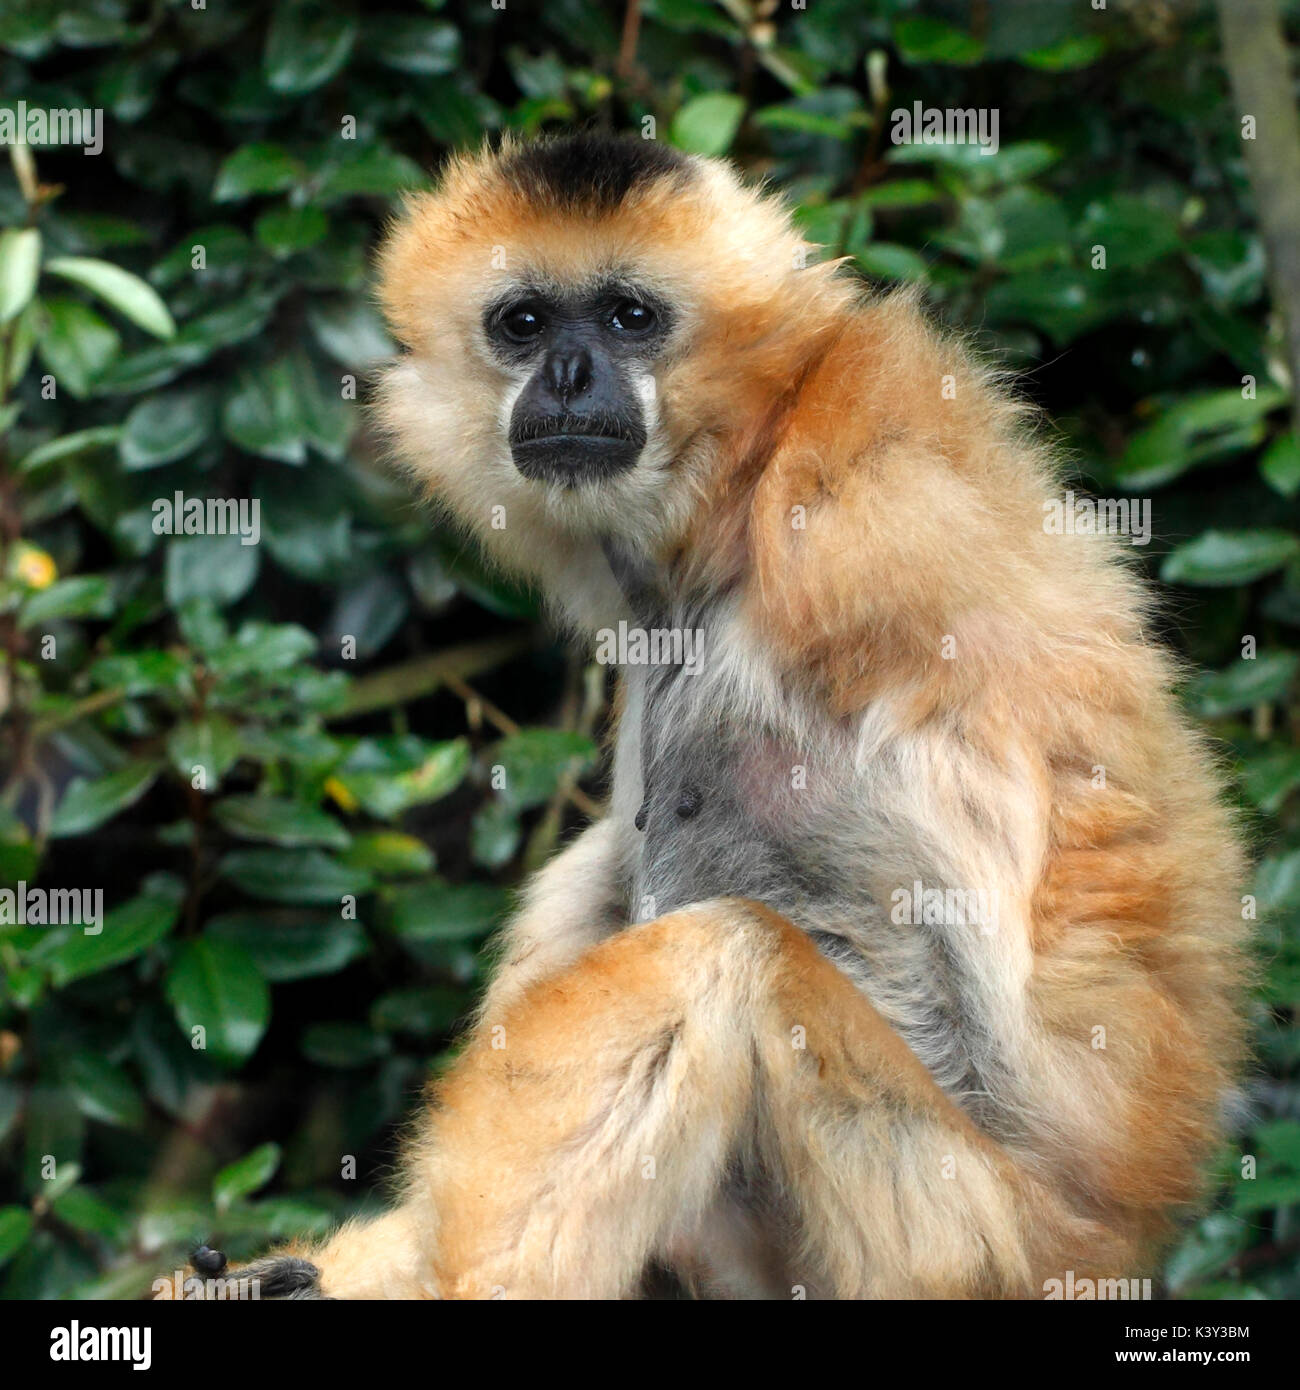 Black-Crested Gibbon (Hylobates concolor), weiblich. Stockfoto